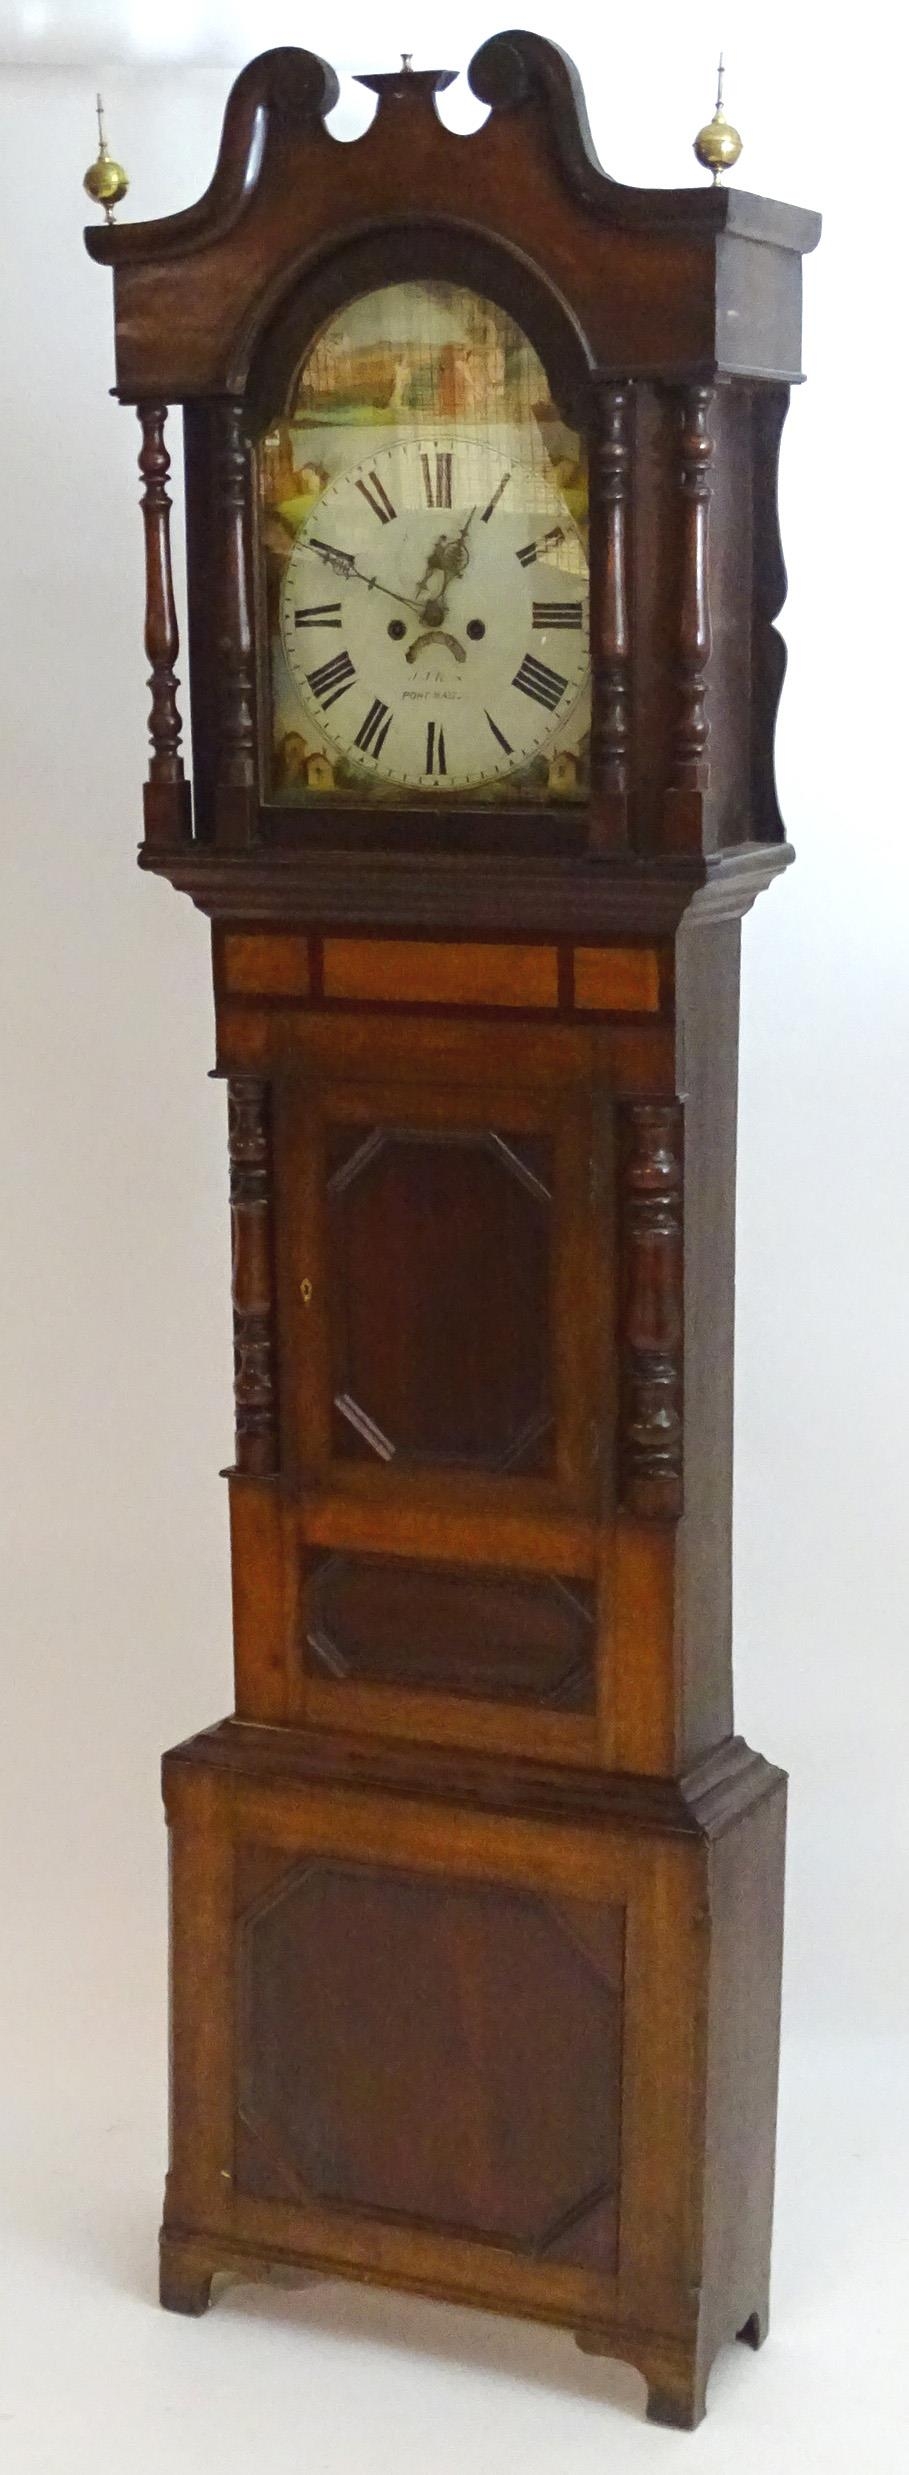 J J Rees Port Madoc : A Welsh Victorian longcase clock with 14" painted dial and 8-day movement. The - Image 10 of 14